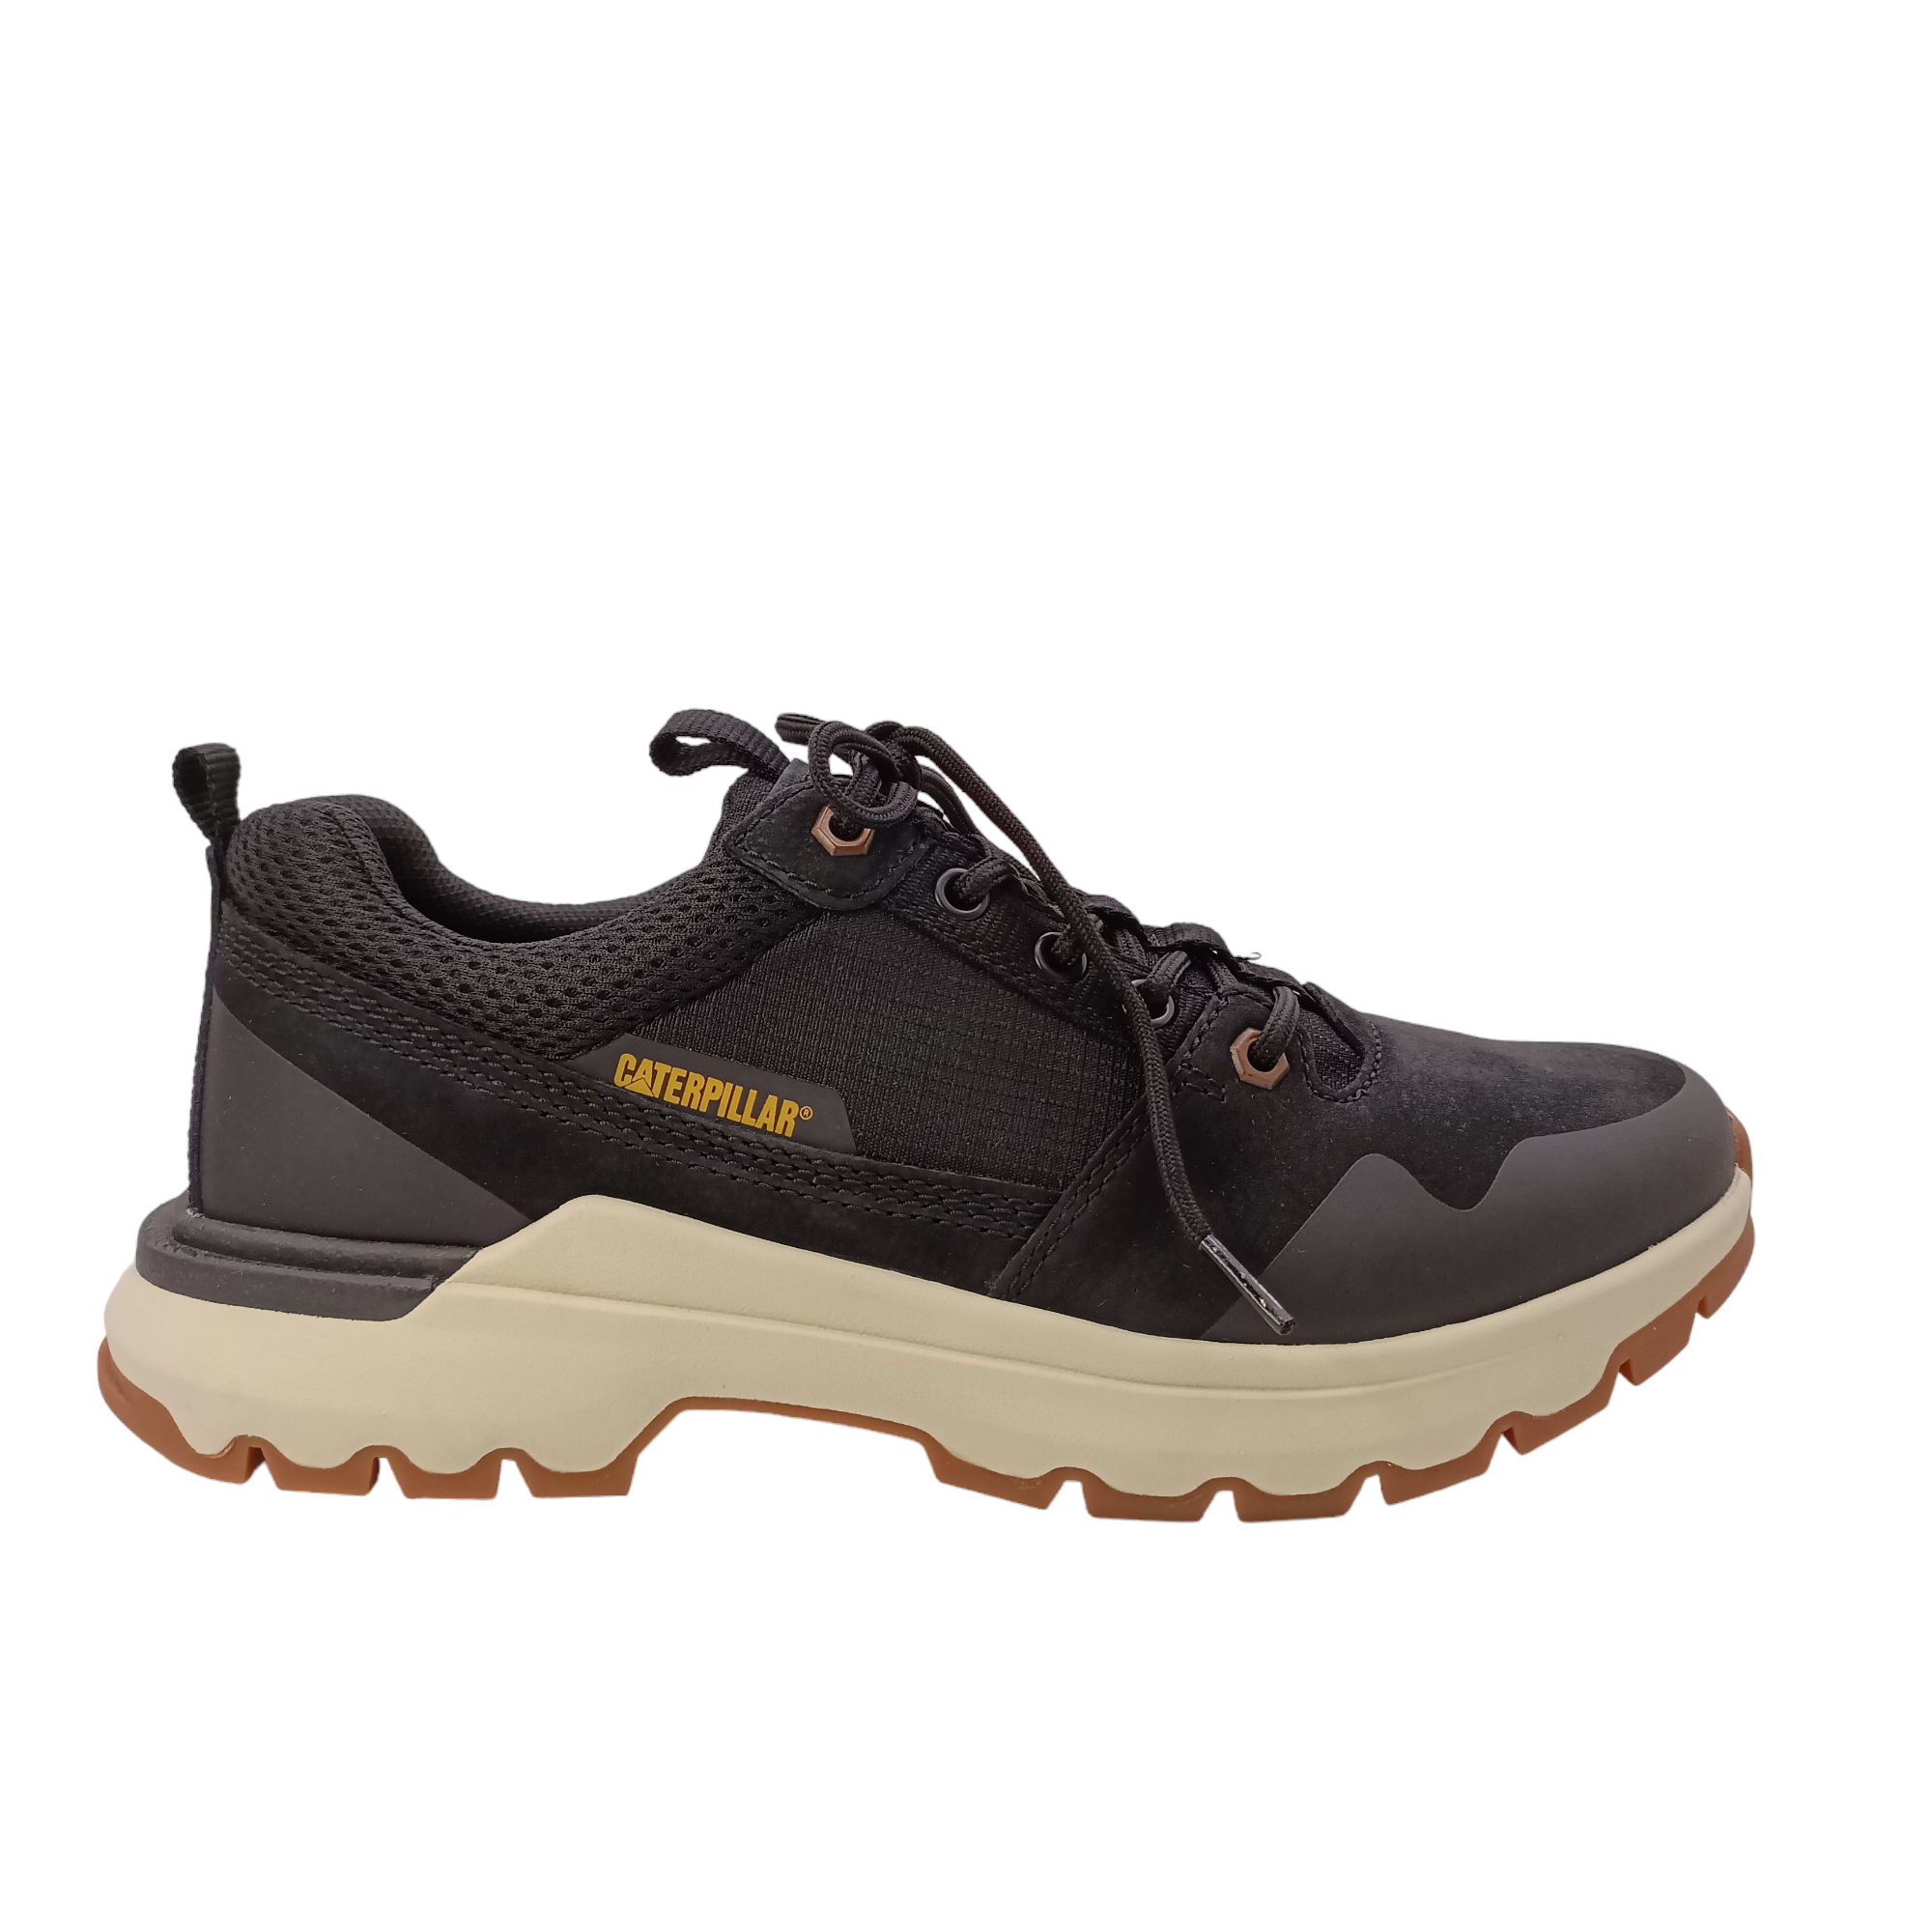 Shop Colorado Lo Caterpillar - with shoe&me - from Caterpillar - Sneakers - Mens, Sneaker, Winter - [collection]